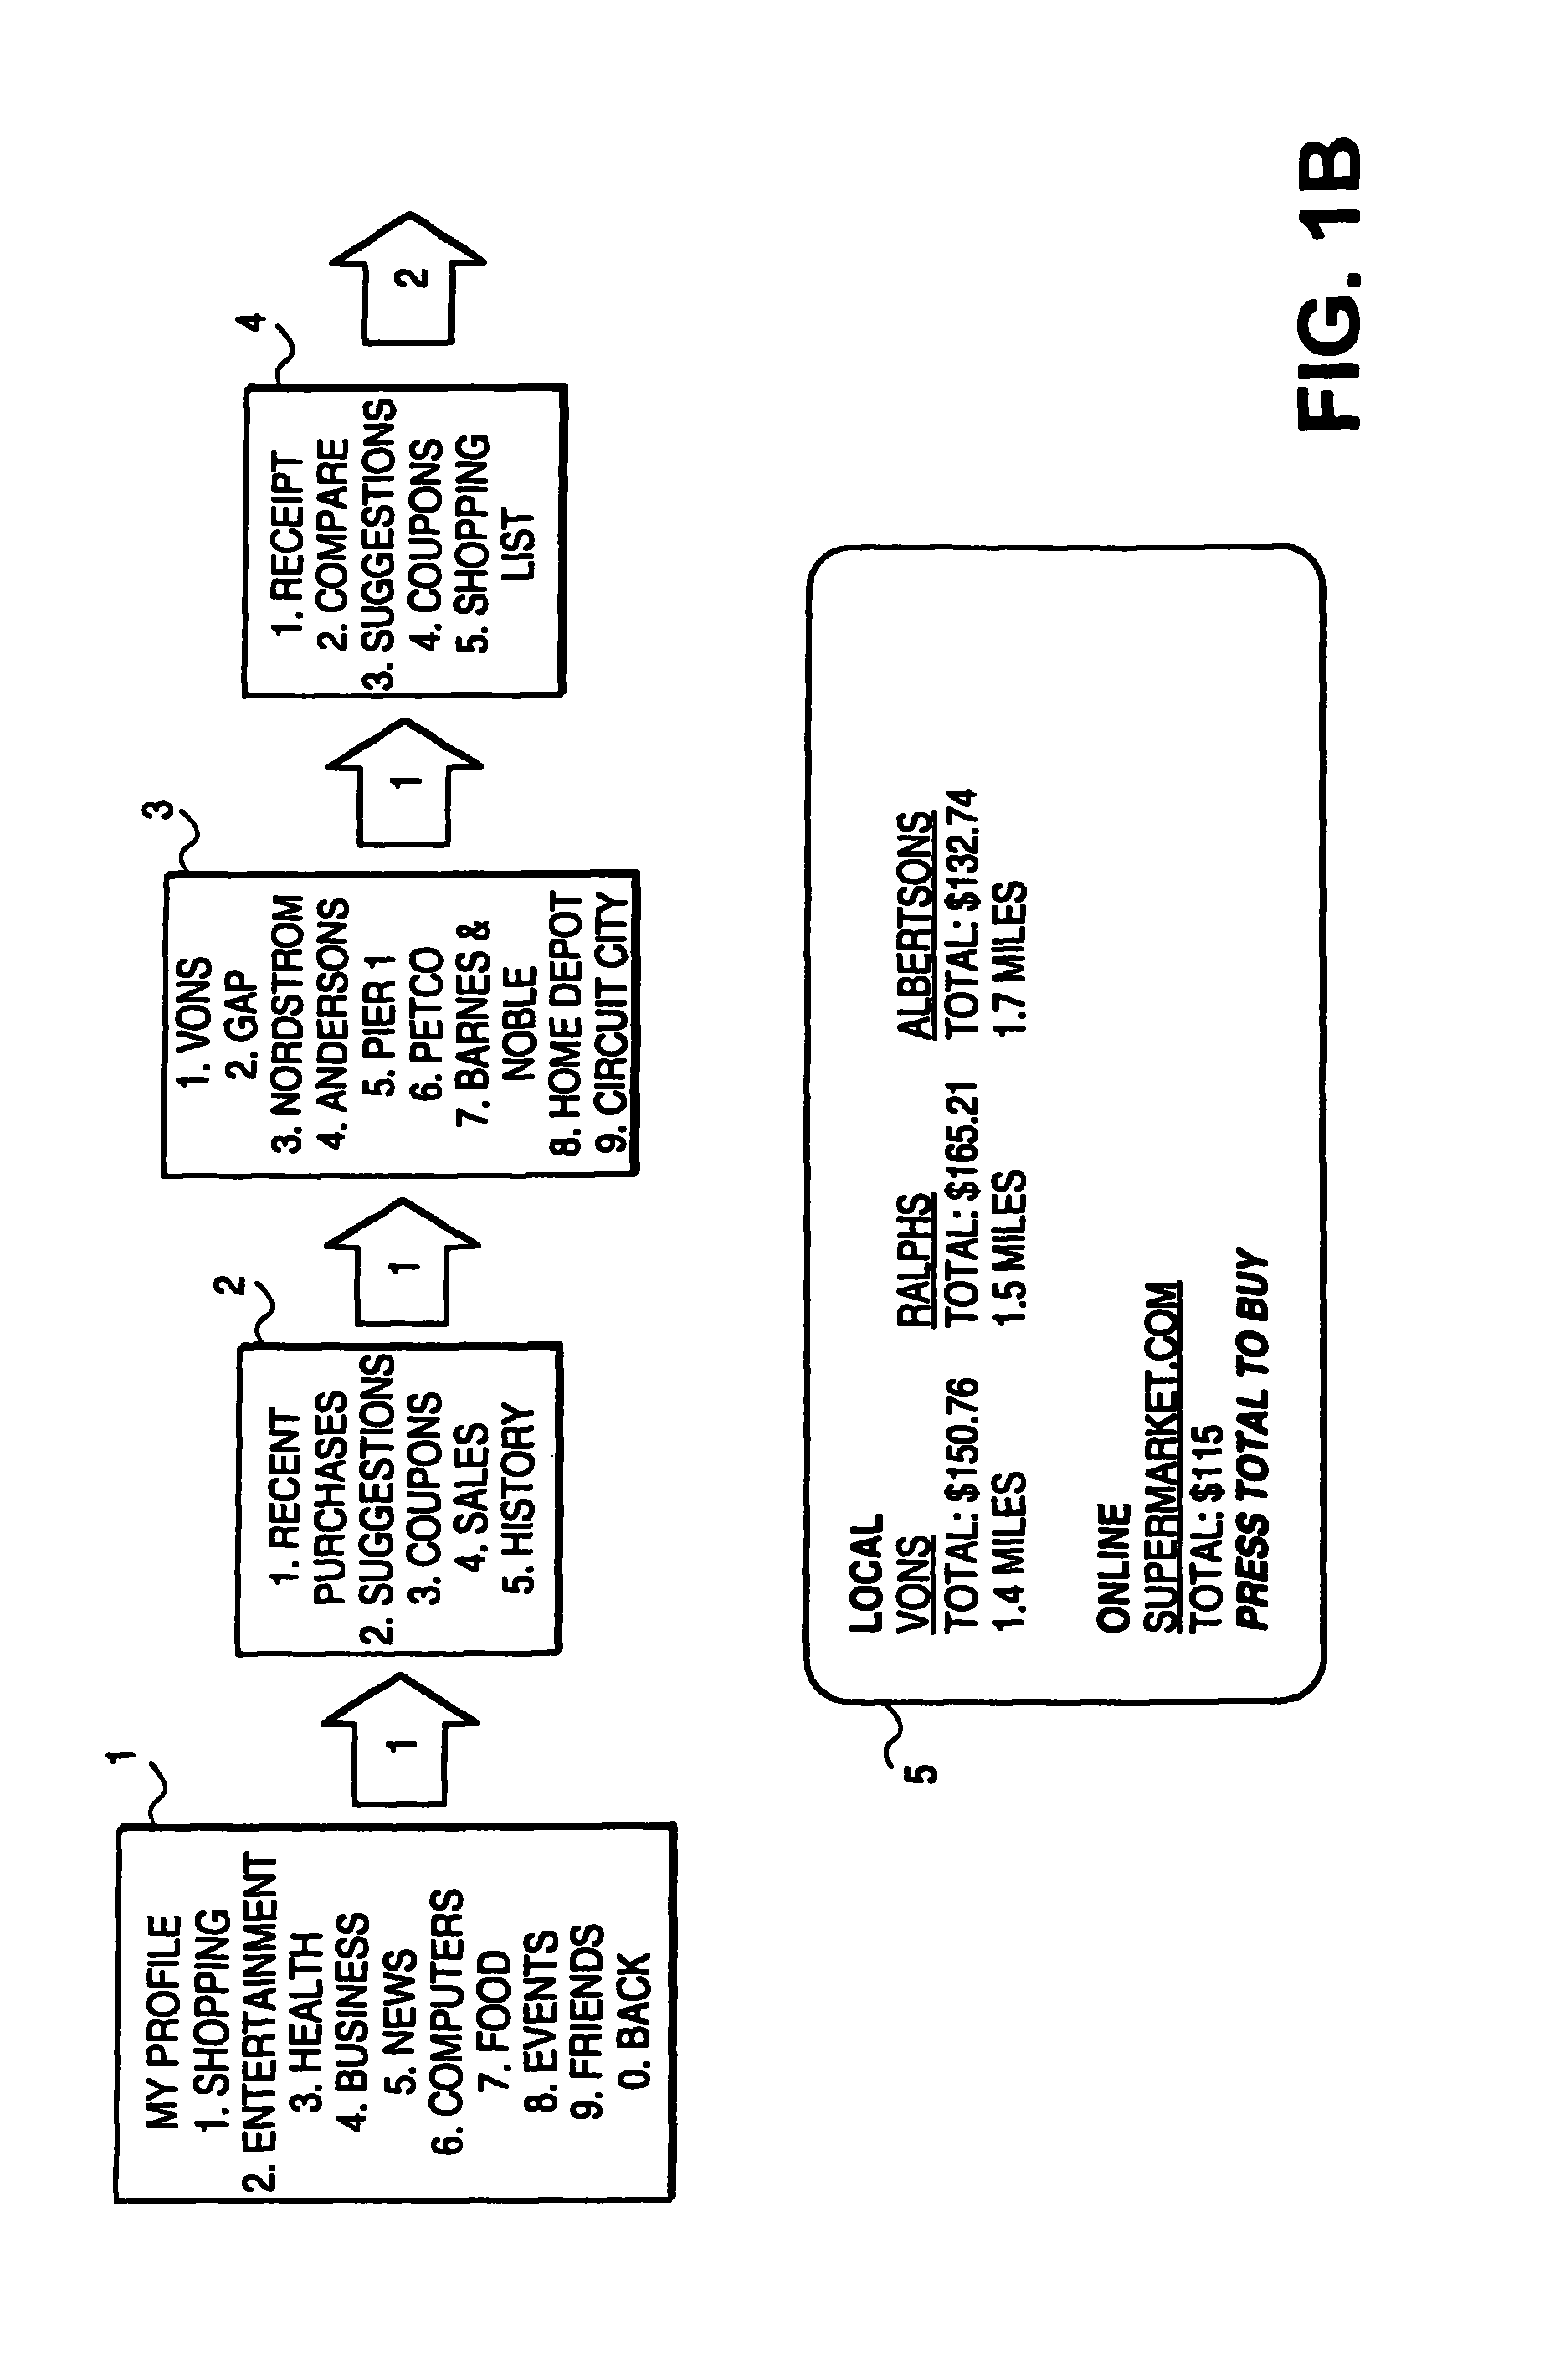 Method for providing information and recommendations based on user activity